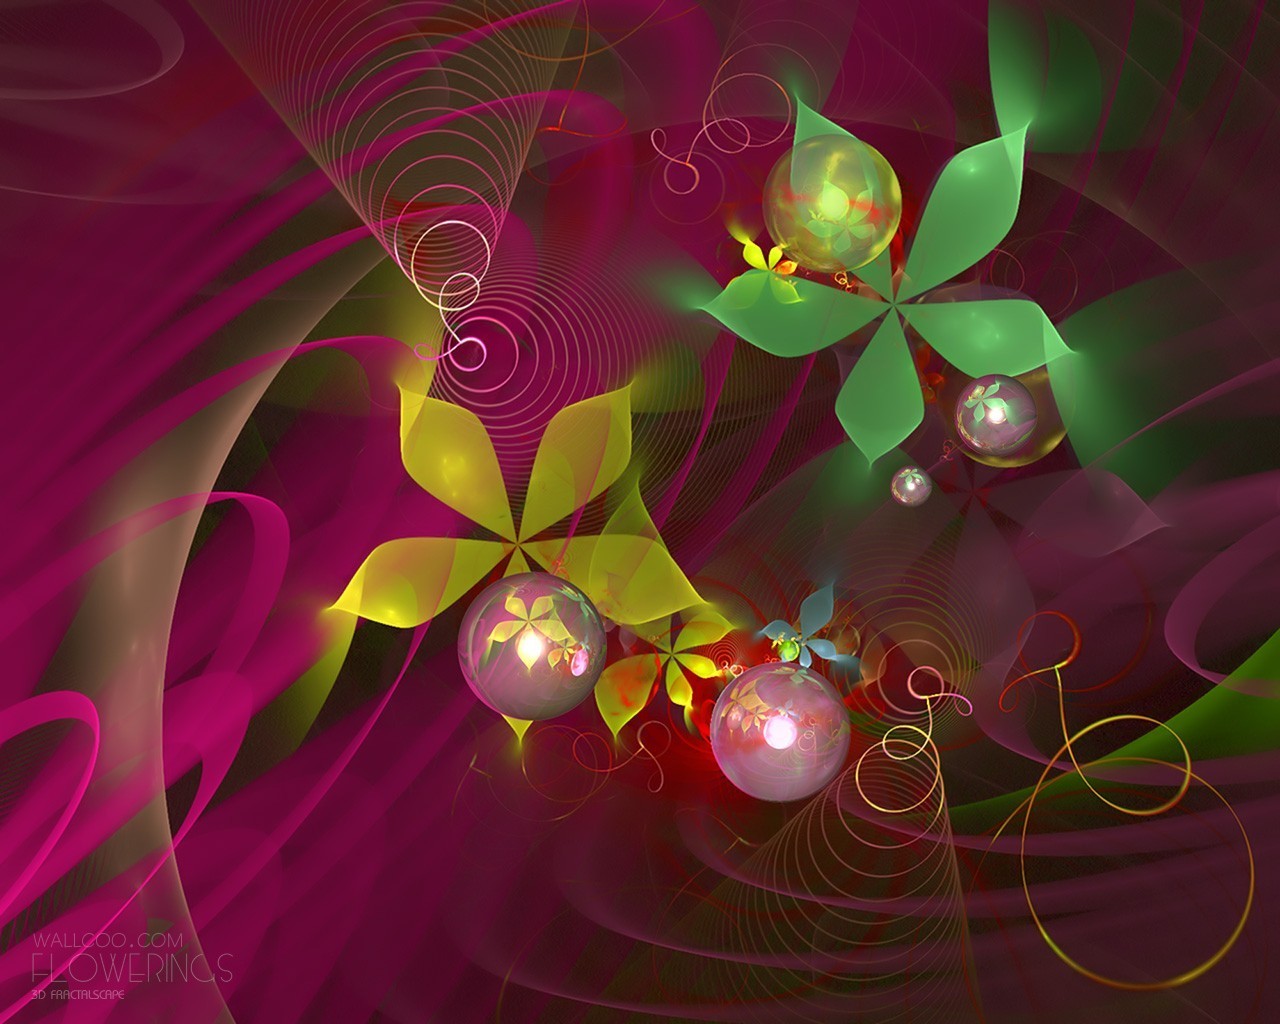 Abstract wallpapers - 97254_1280_1024.jpg